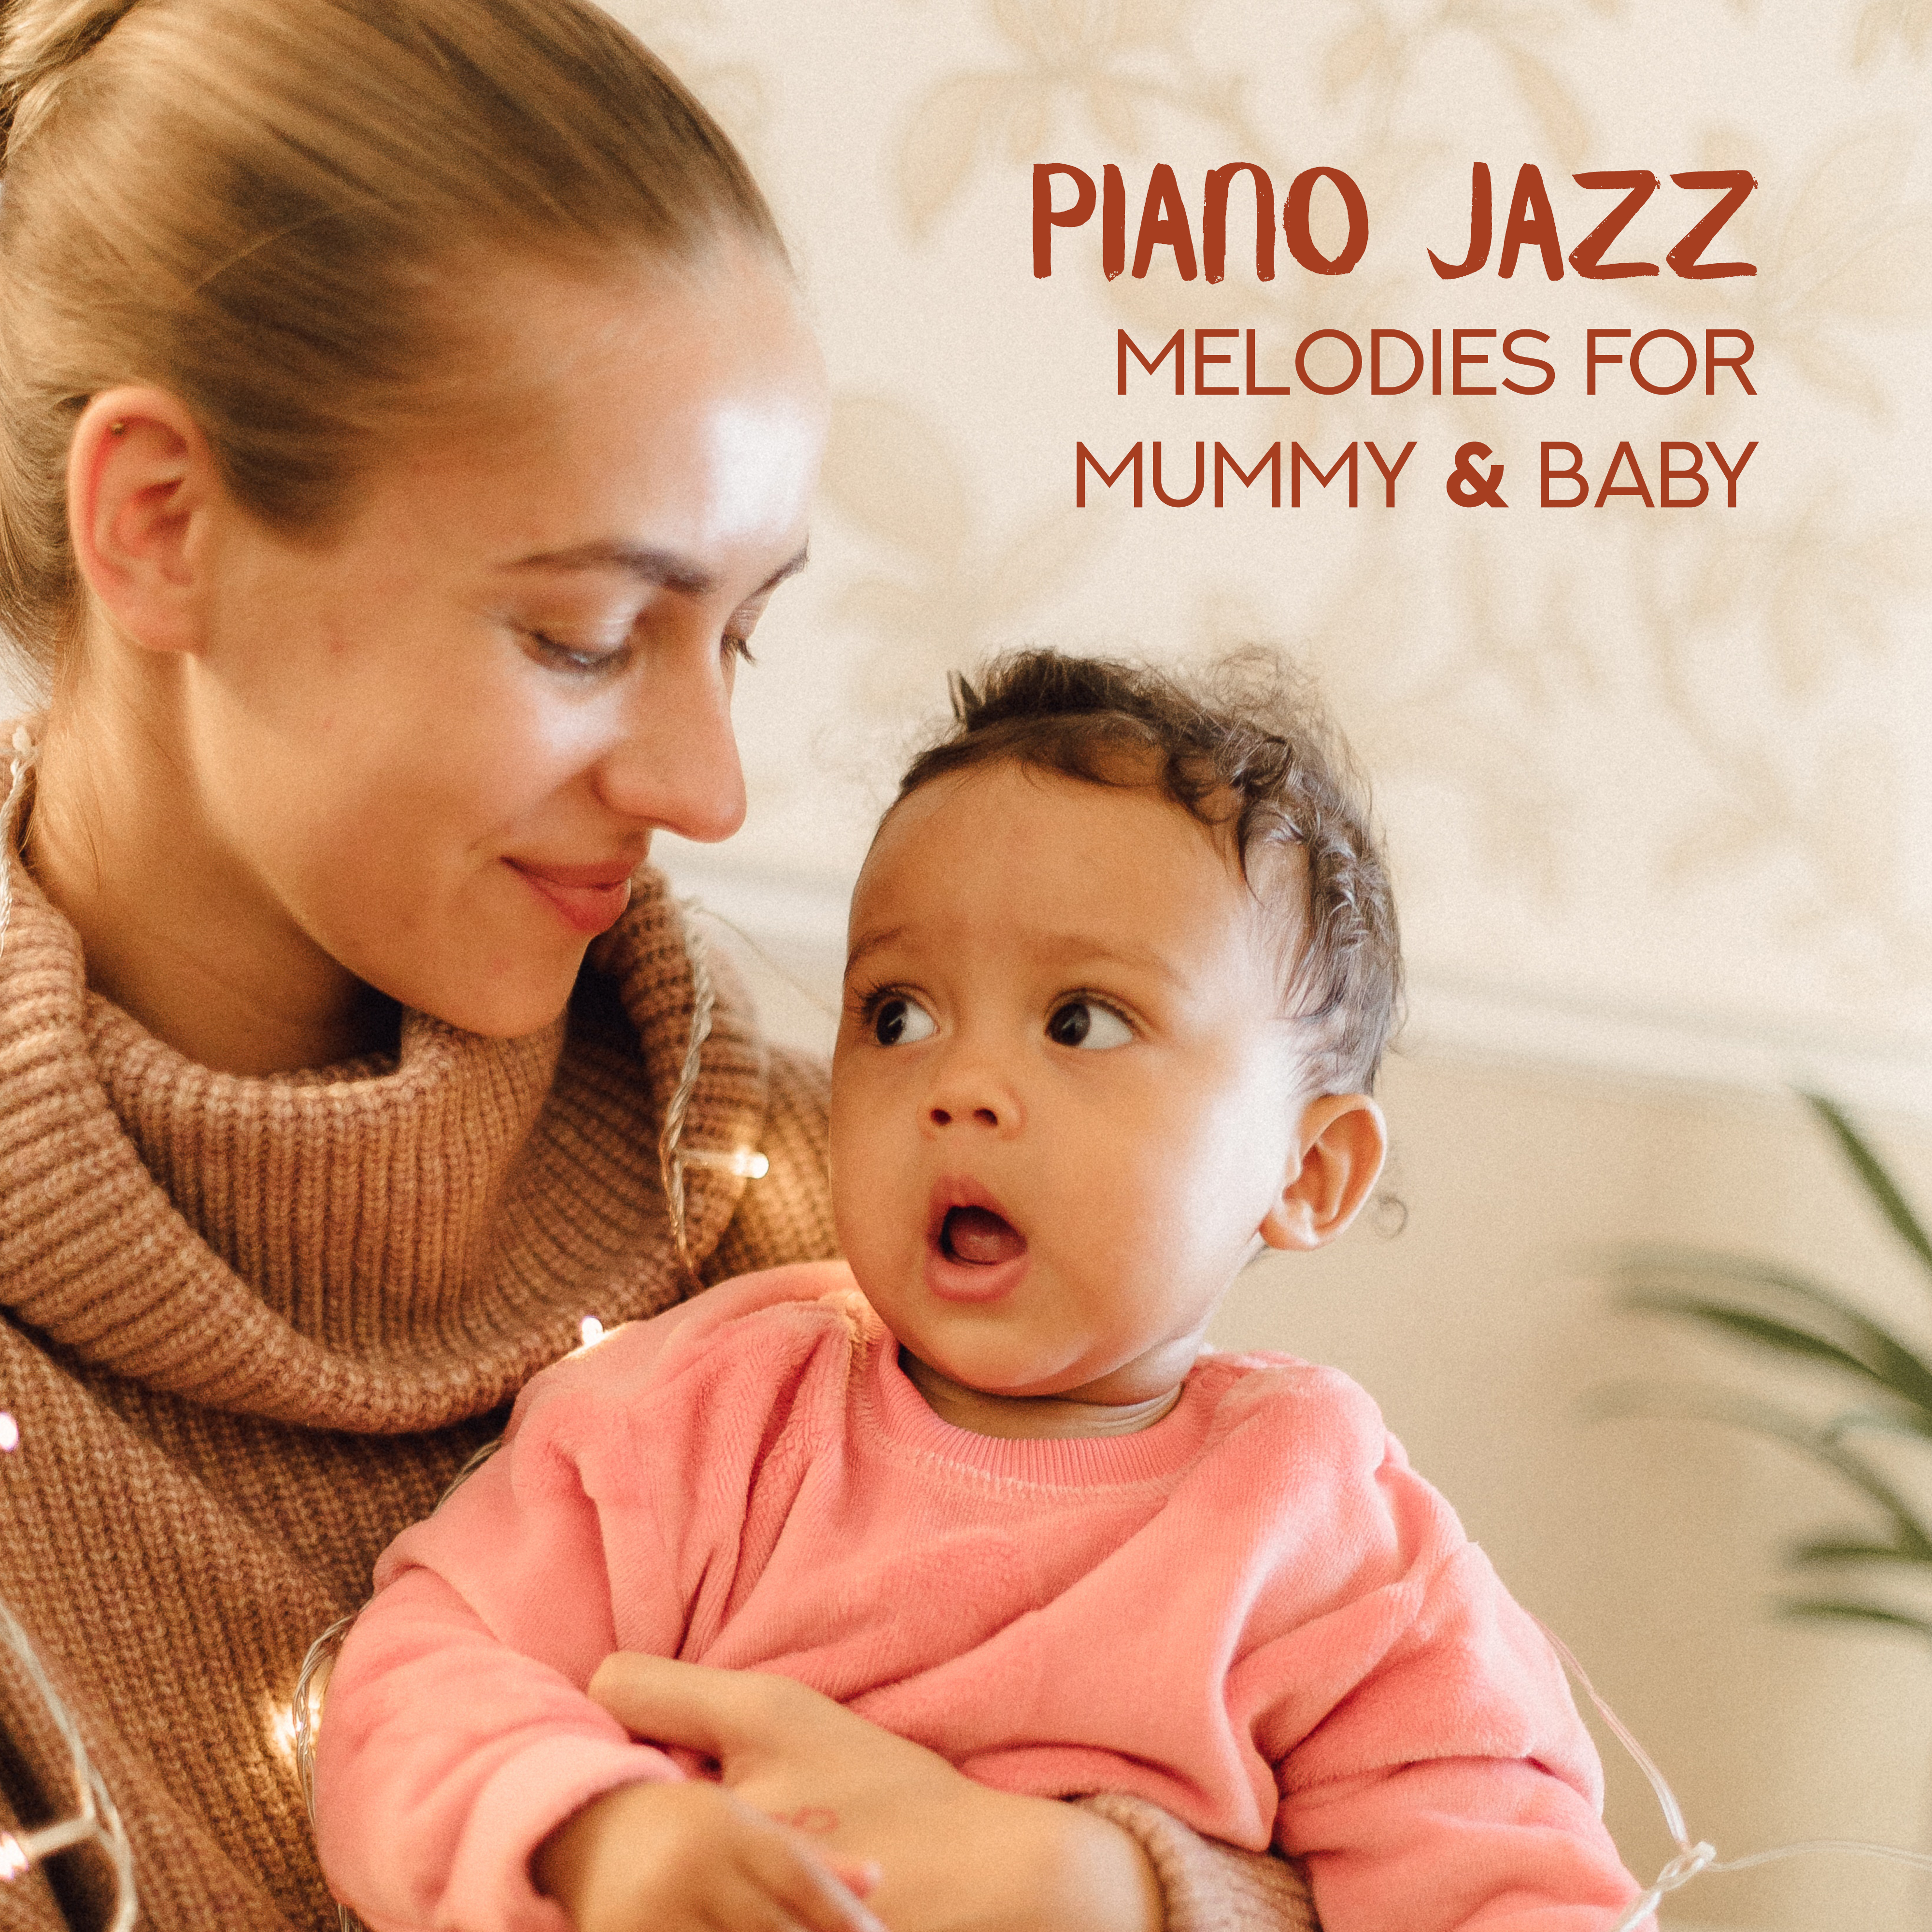 Piano Jazz Melodies for Mummy & Baby